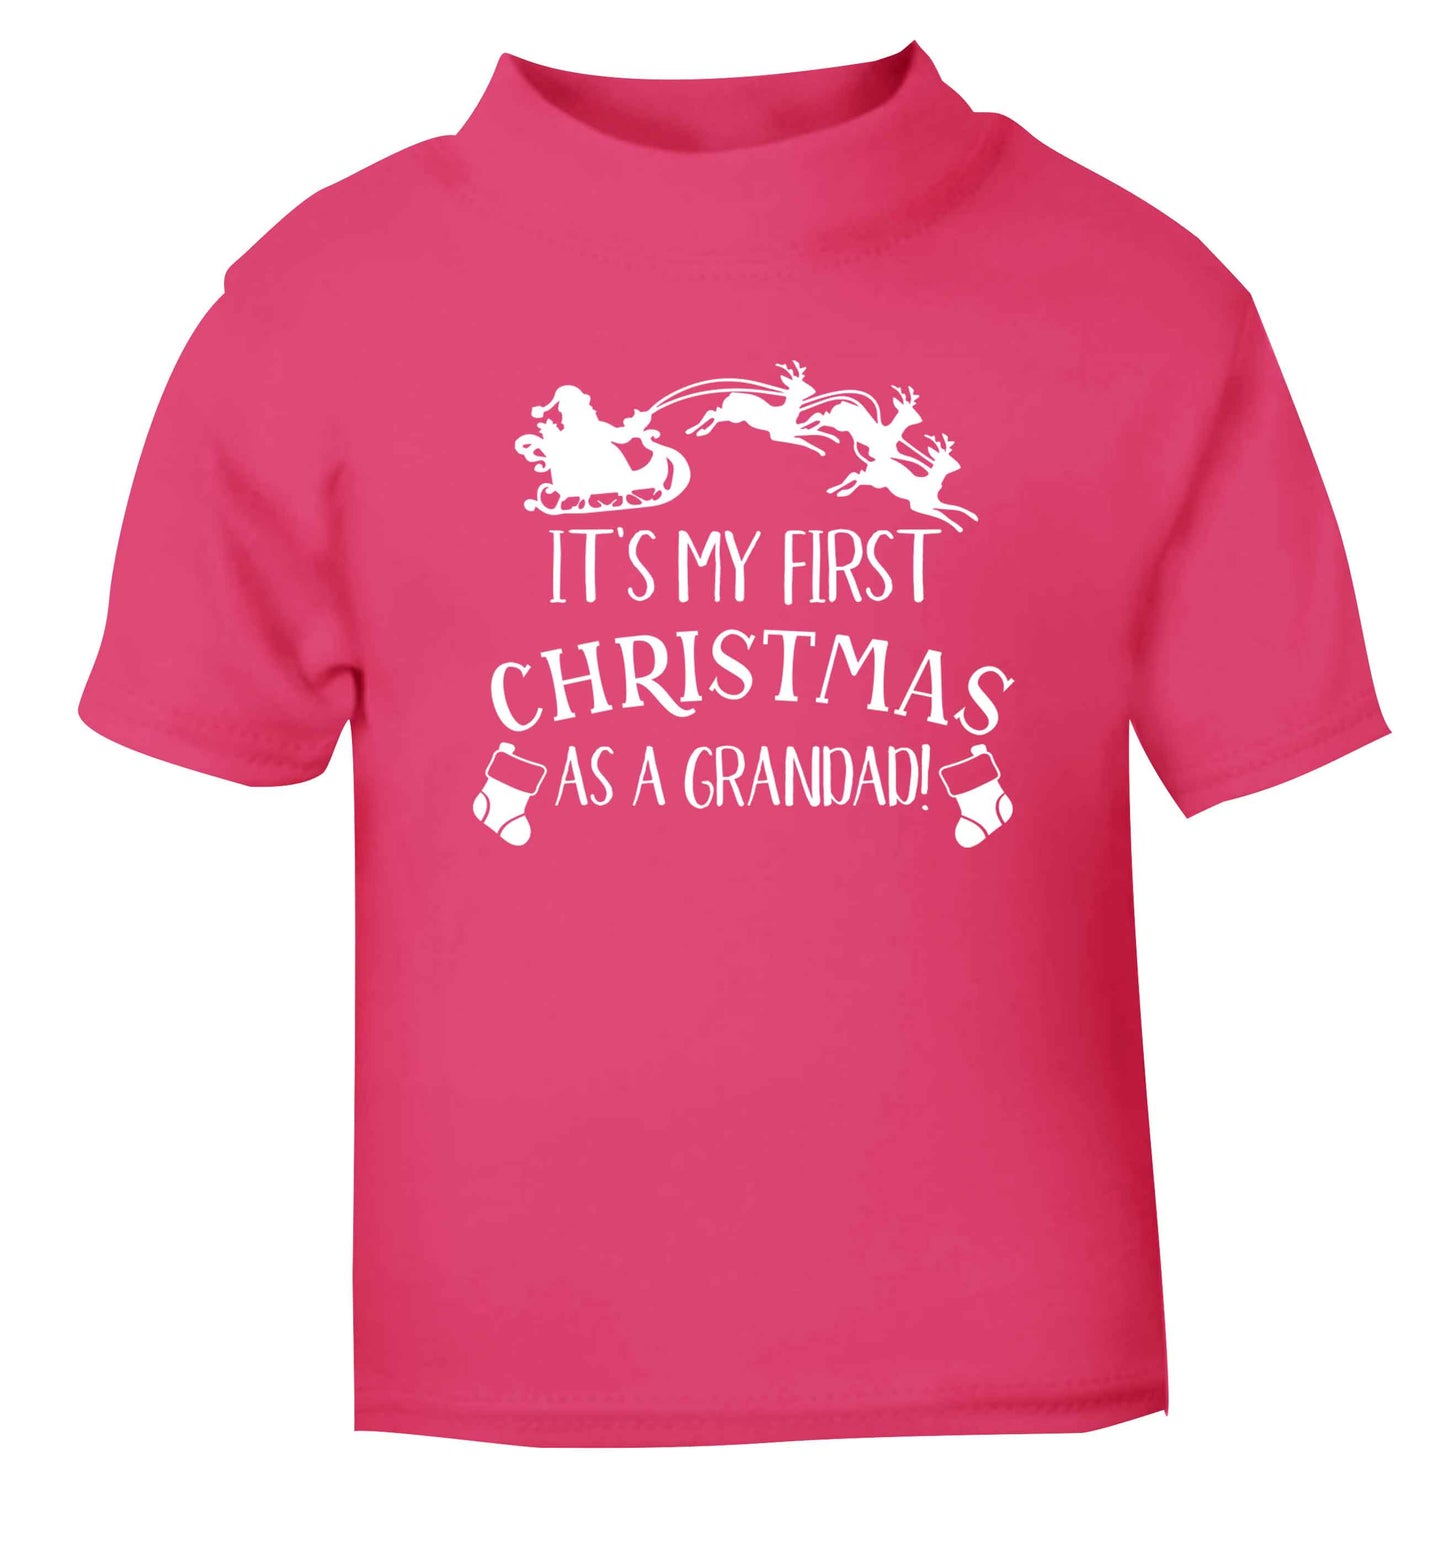 It's my first Christmas as a grandad! pink Baby Toddler Tshirt 2 Years